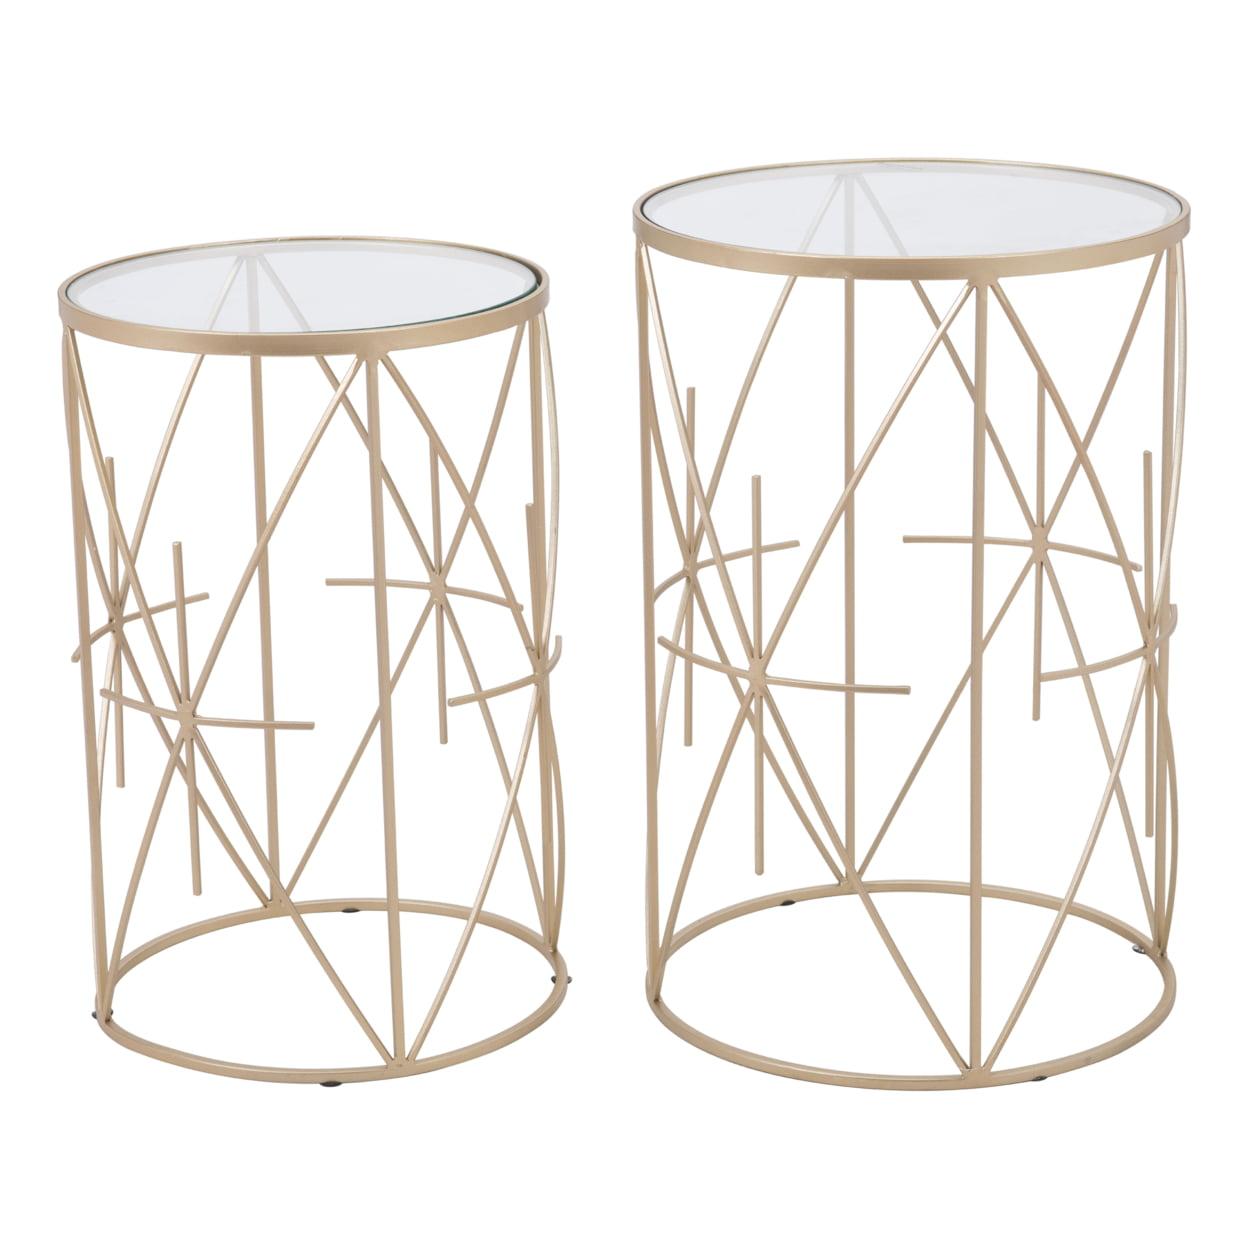 Elegant Gold and Glass Round Side Table Set, 15''